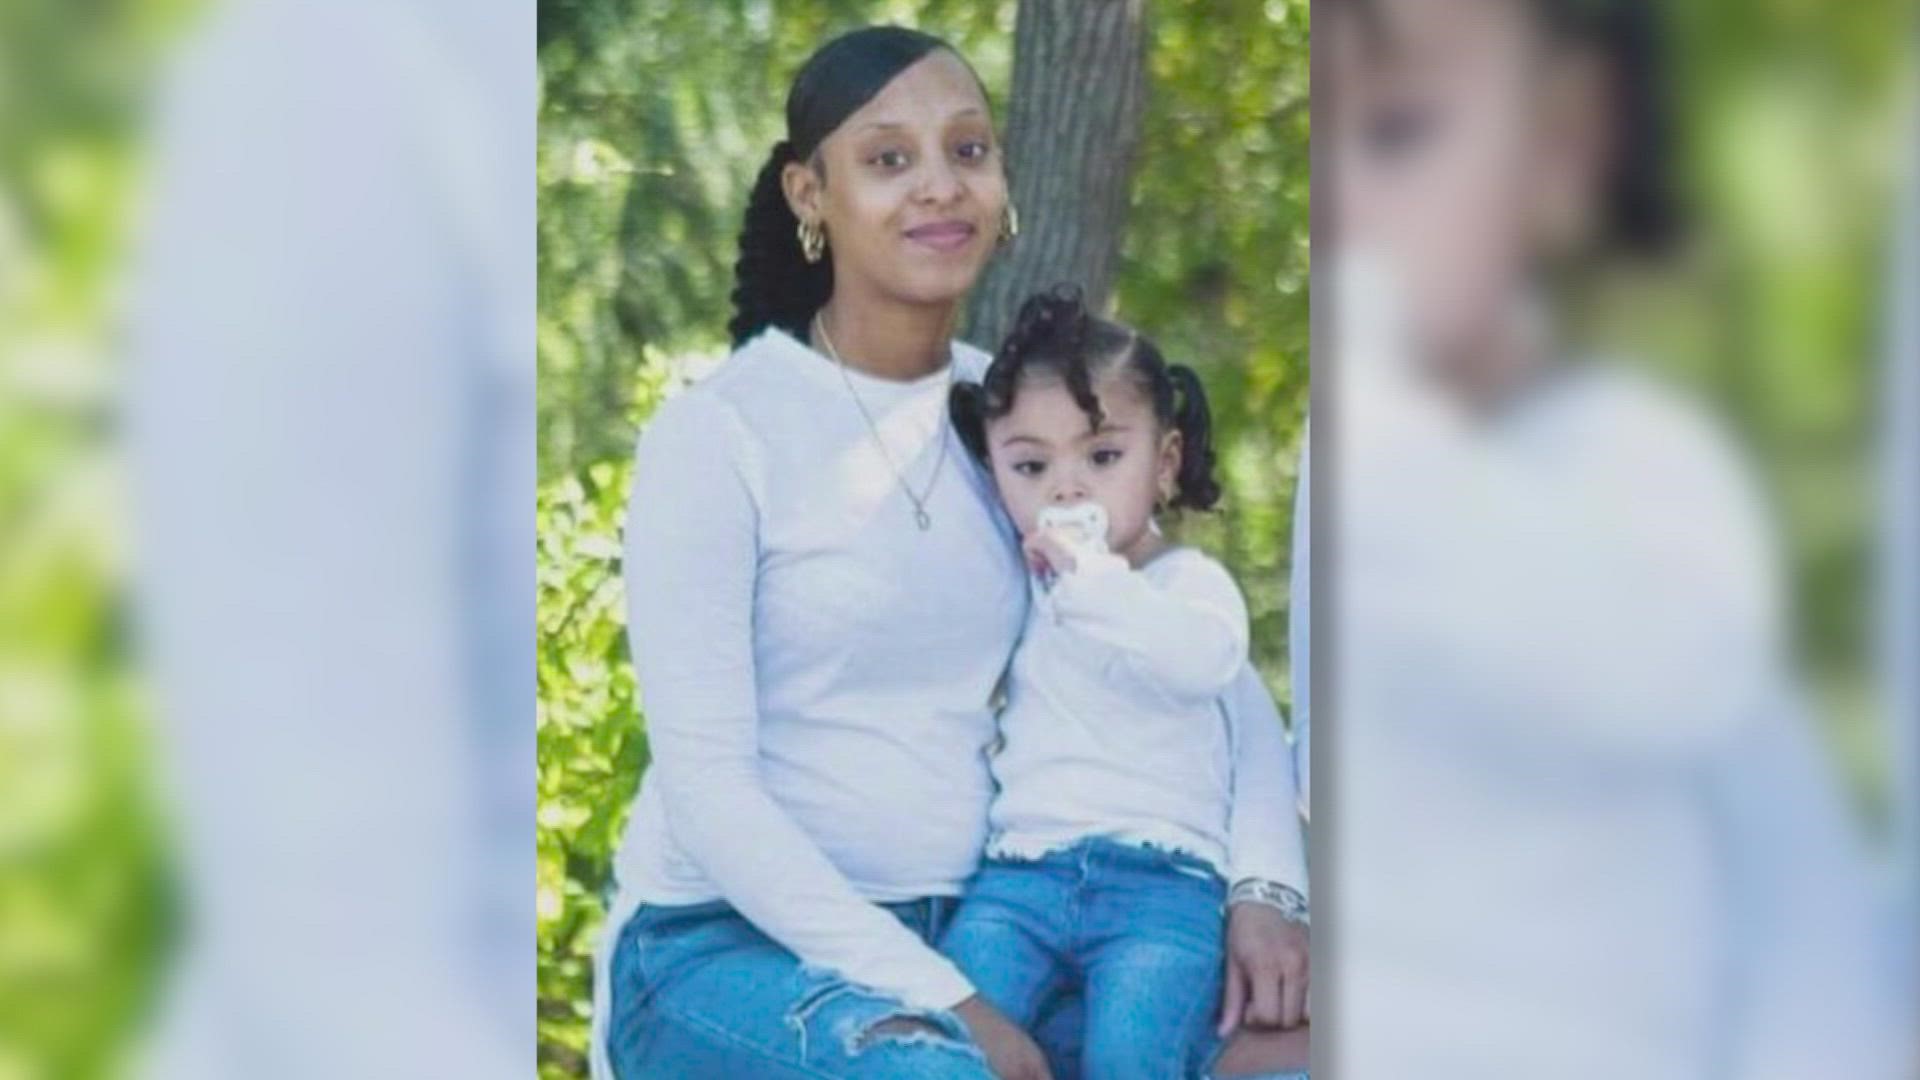 D'yani Thomas, a mother of two, planned to join the Air Force. Police said nearly 50 shots were fired into her car, probably from an AK-47.